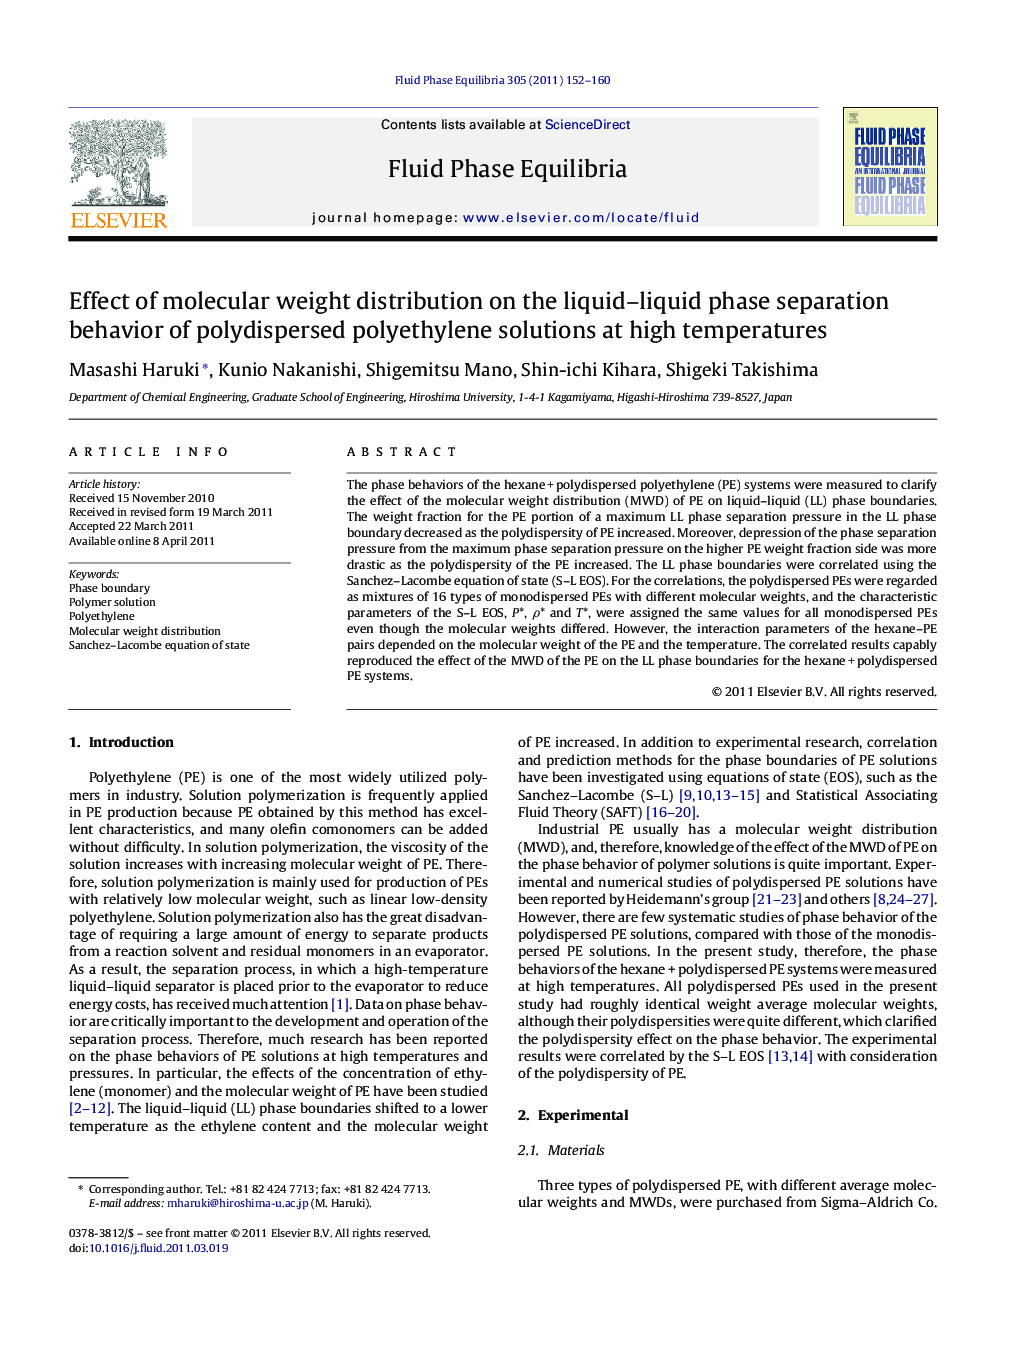 Effect of molecular weight distribution on the liquid–liquid phase separation behavior of polydispersed polyethylene solutions at high temperatures